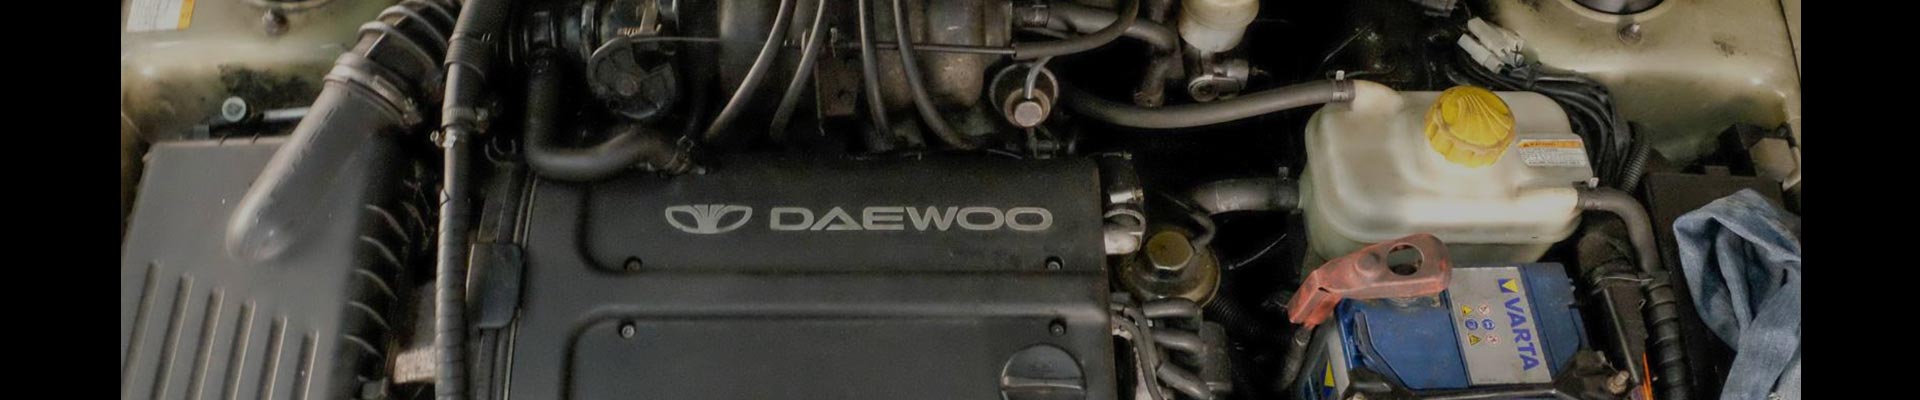 Shop Replacement 2001 Daewoo Lanos Parts with Discounted Price on the Net